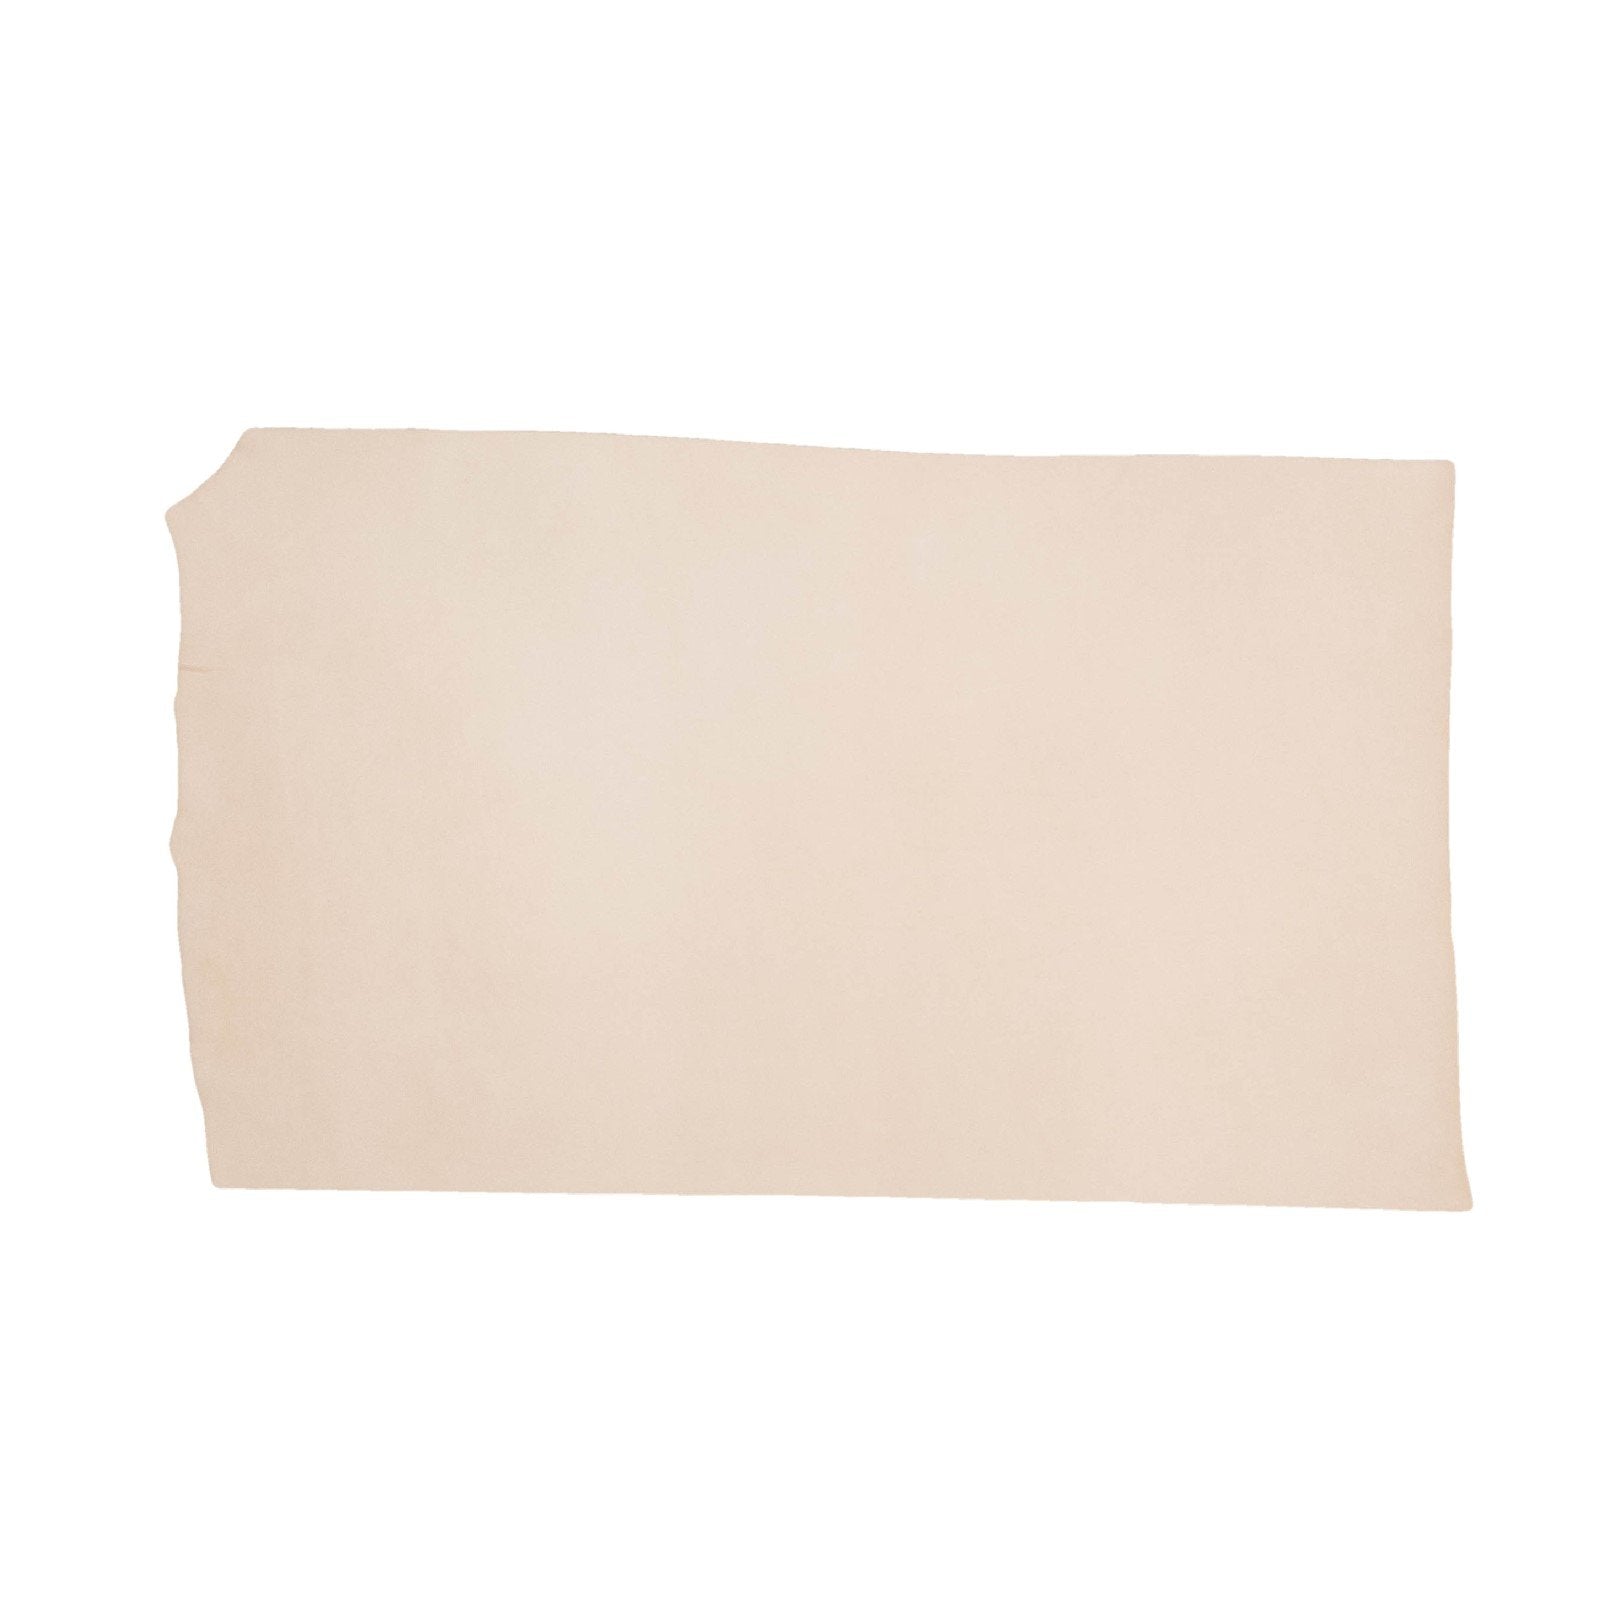 Natural, 5-6 oz, 6.5-7.5 / 18-35 Sq Ft Veg Tan Sides & Pieces, Artisans Choice, Middle Piece / 6.5-7.5 | The Leather Guy